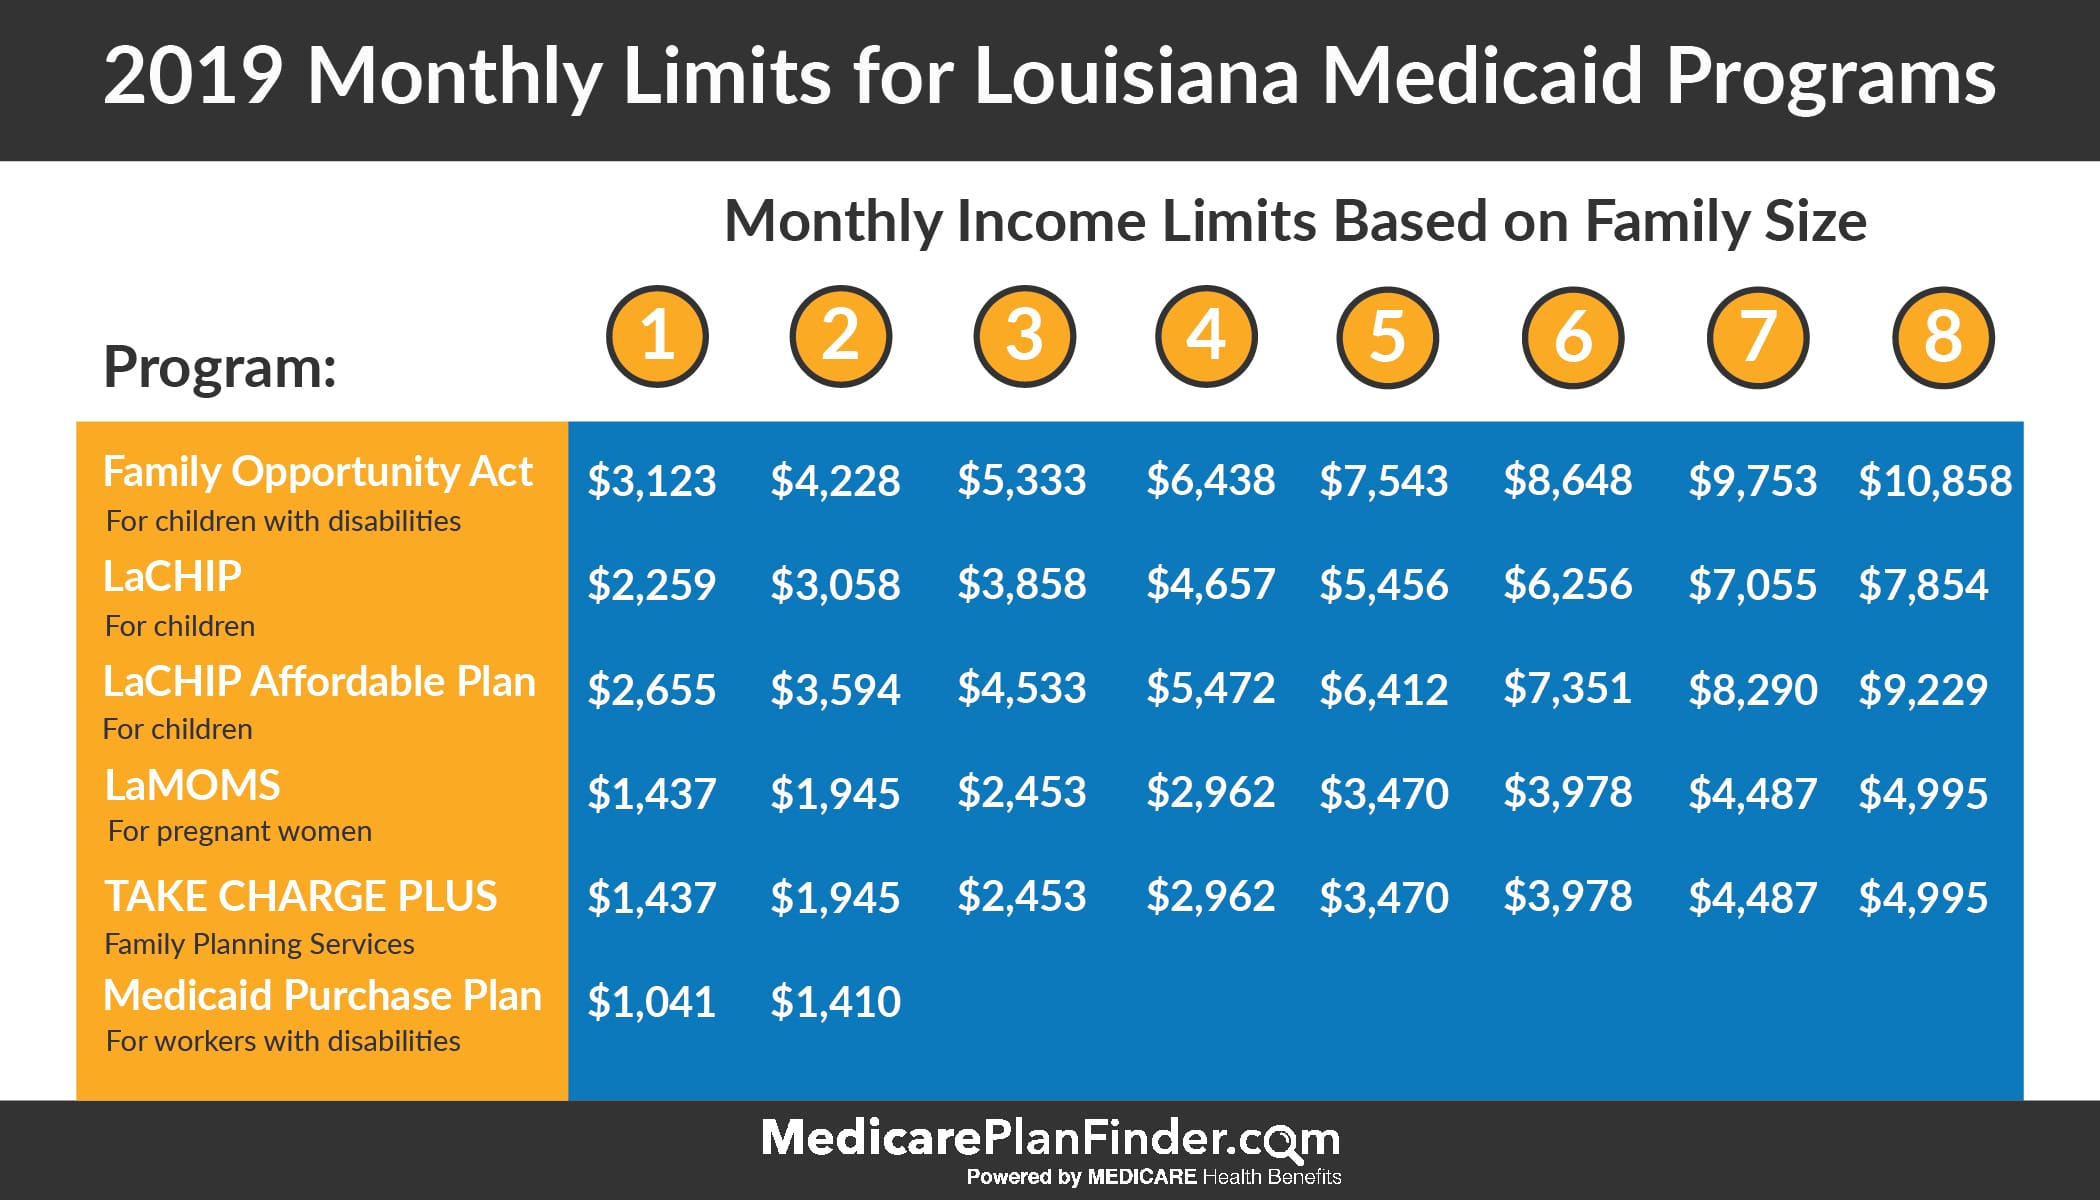 Medicare Louisiana: Plans and Eligibility | Medicare Plan Finder